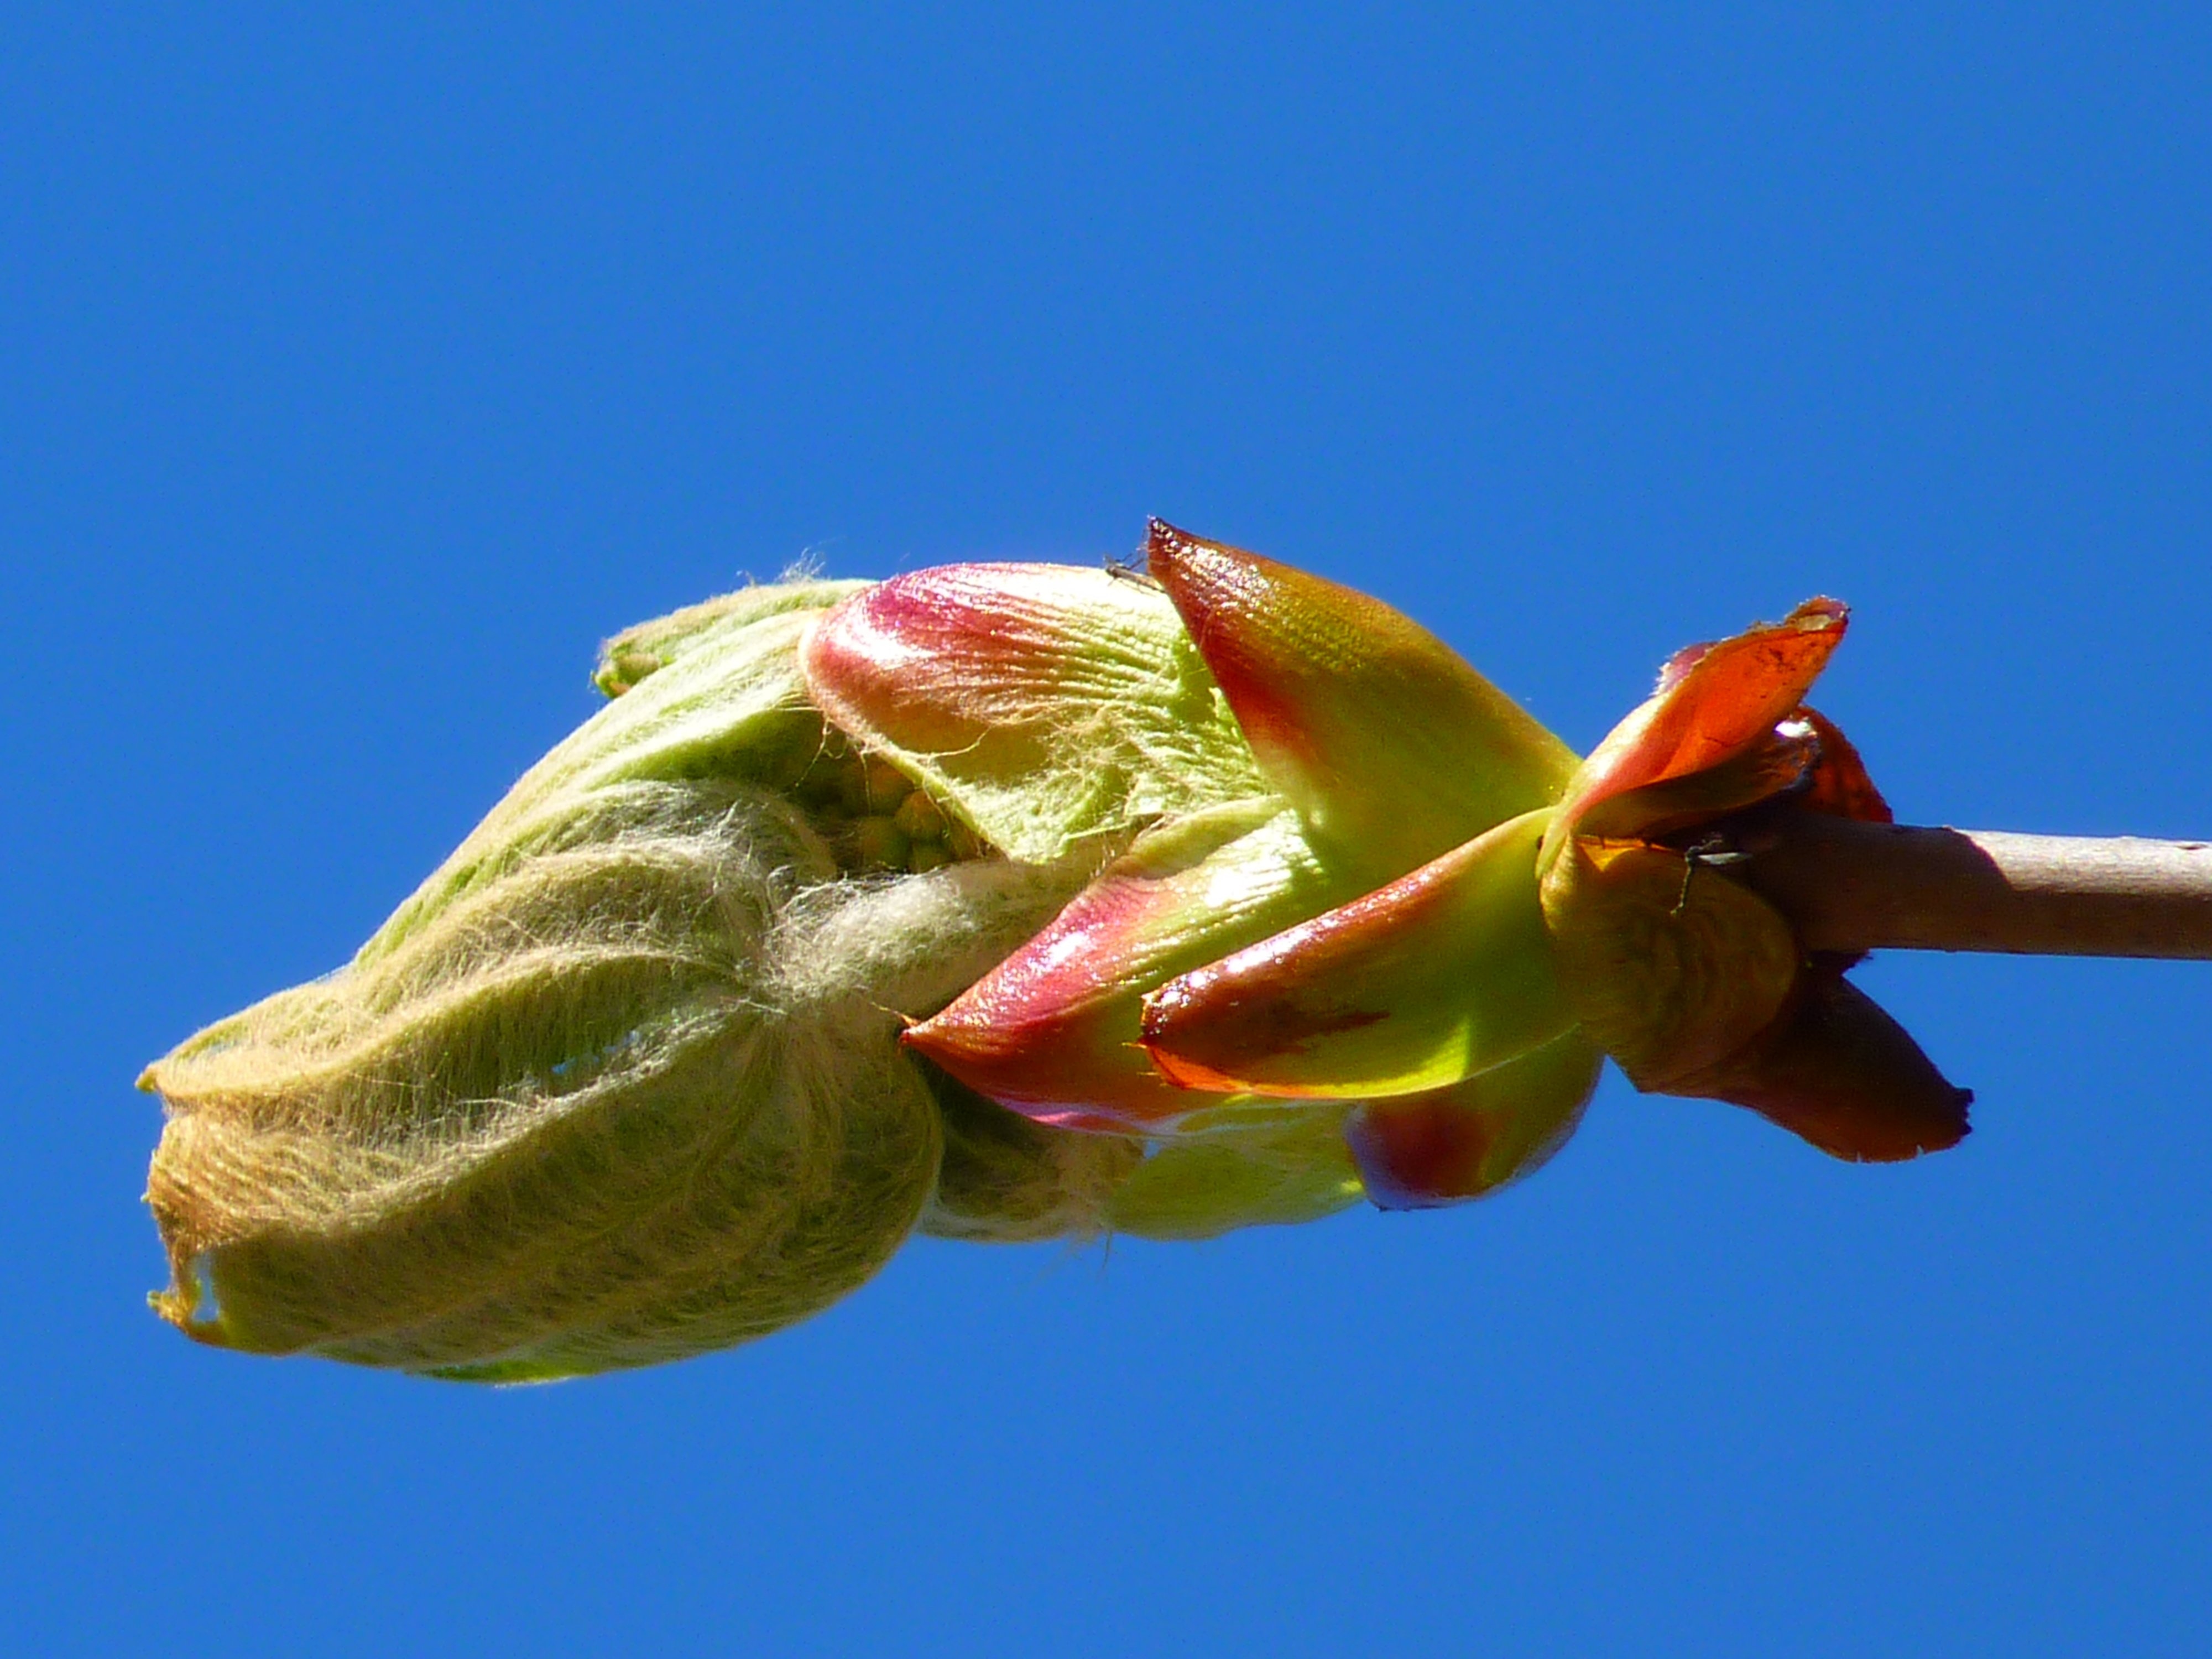 green and red flower buds